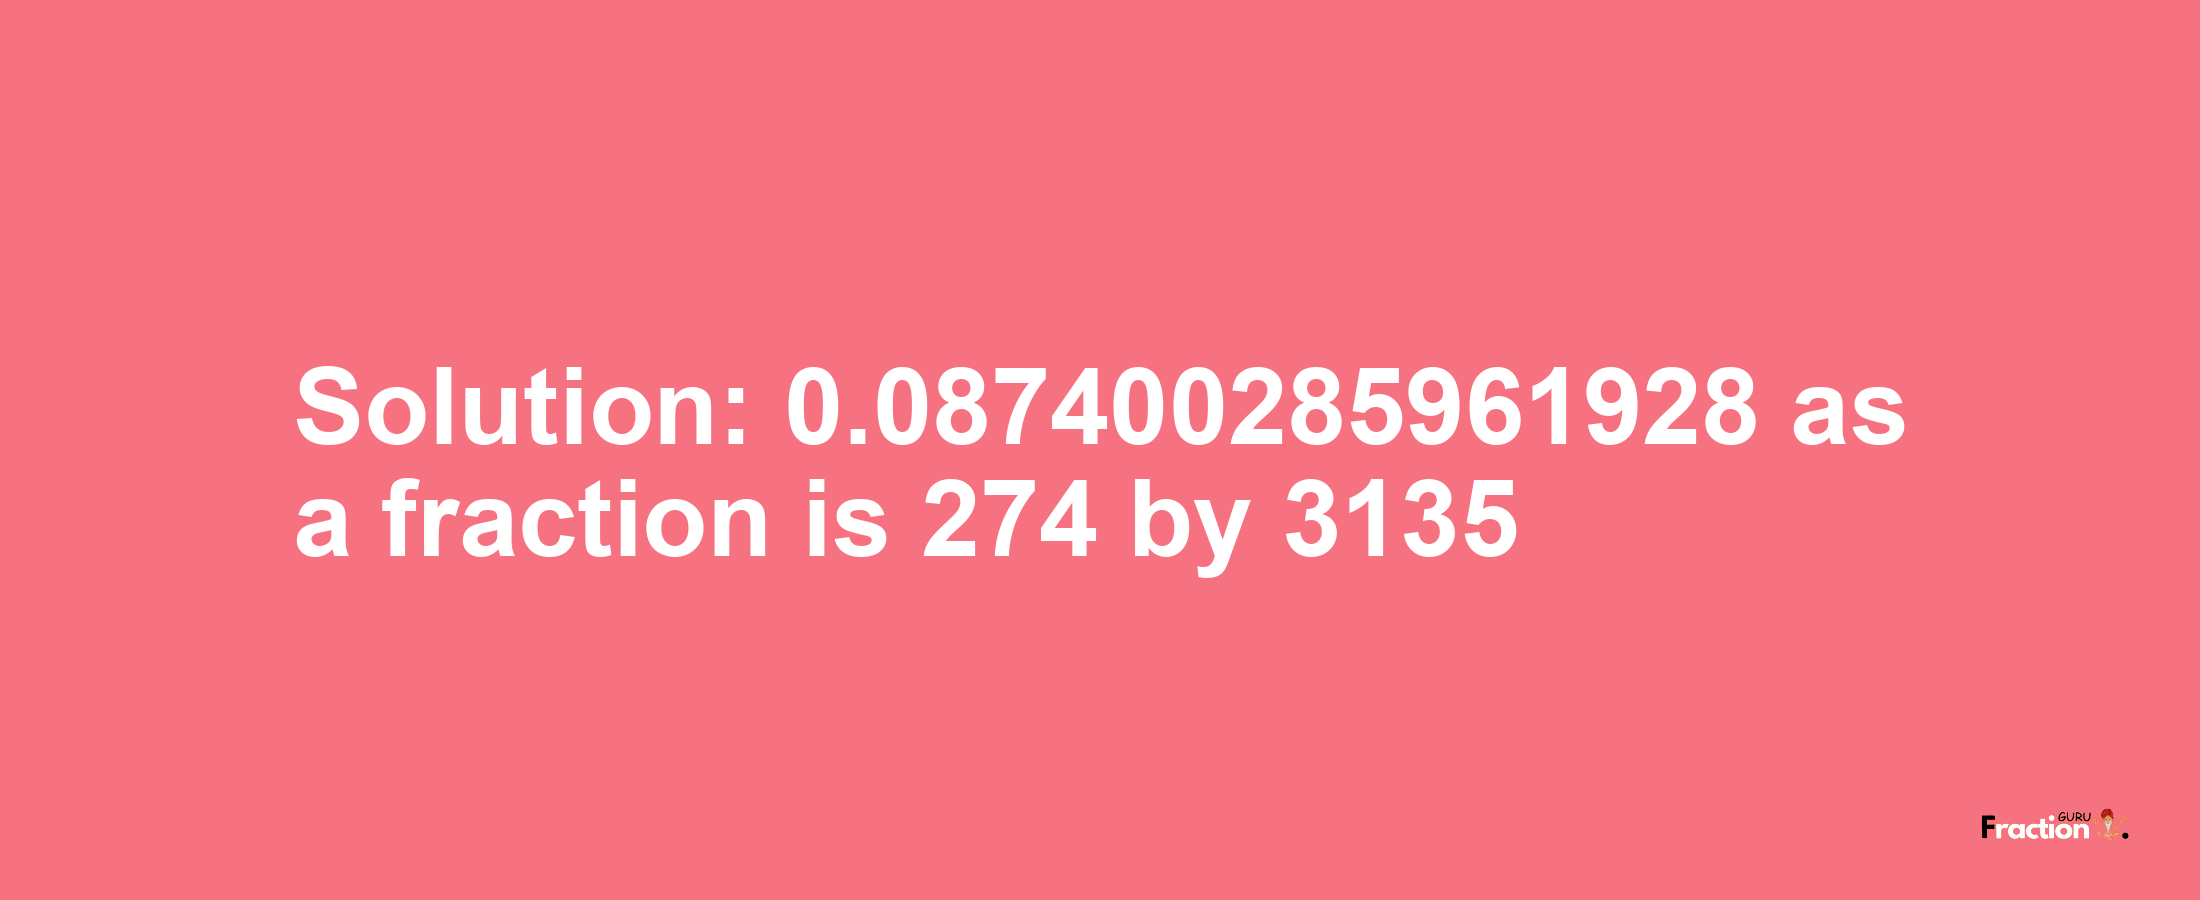 Solution:0.087400285961928 as a fraction is 274/3135